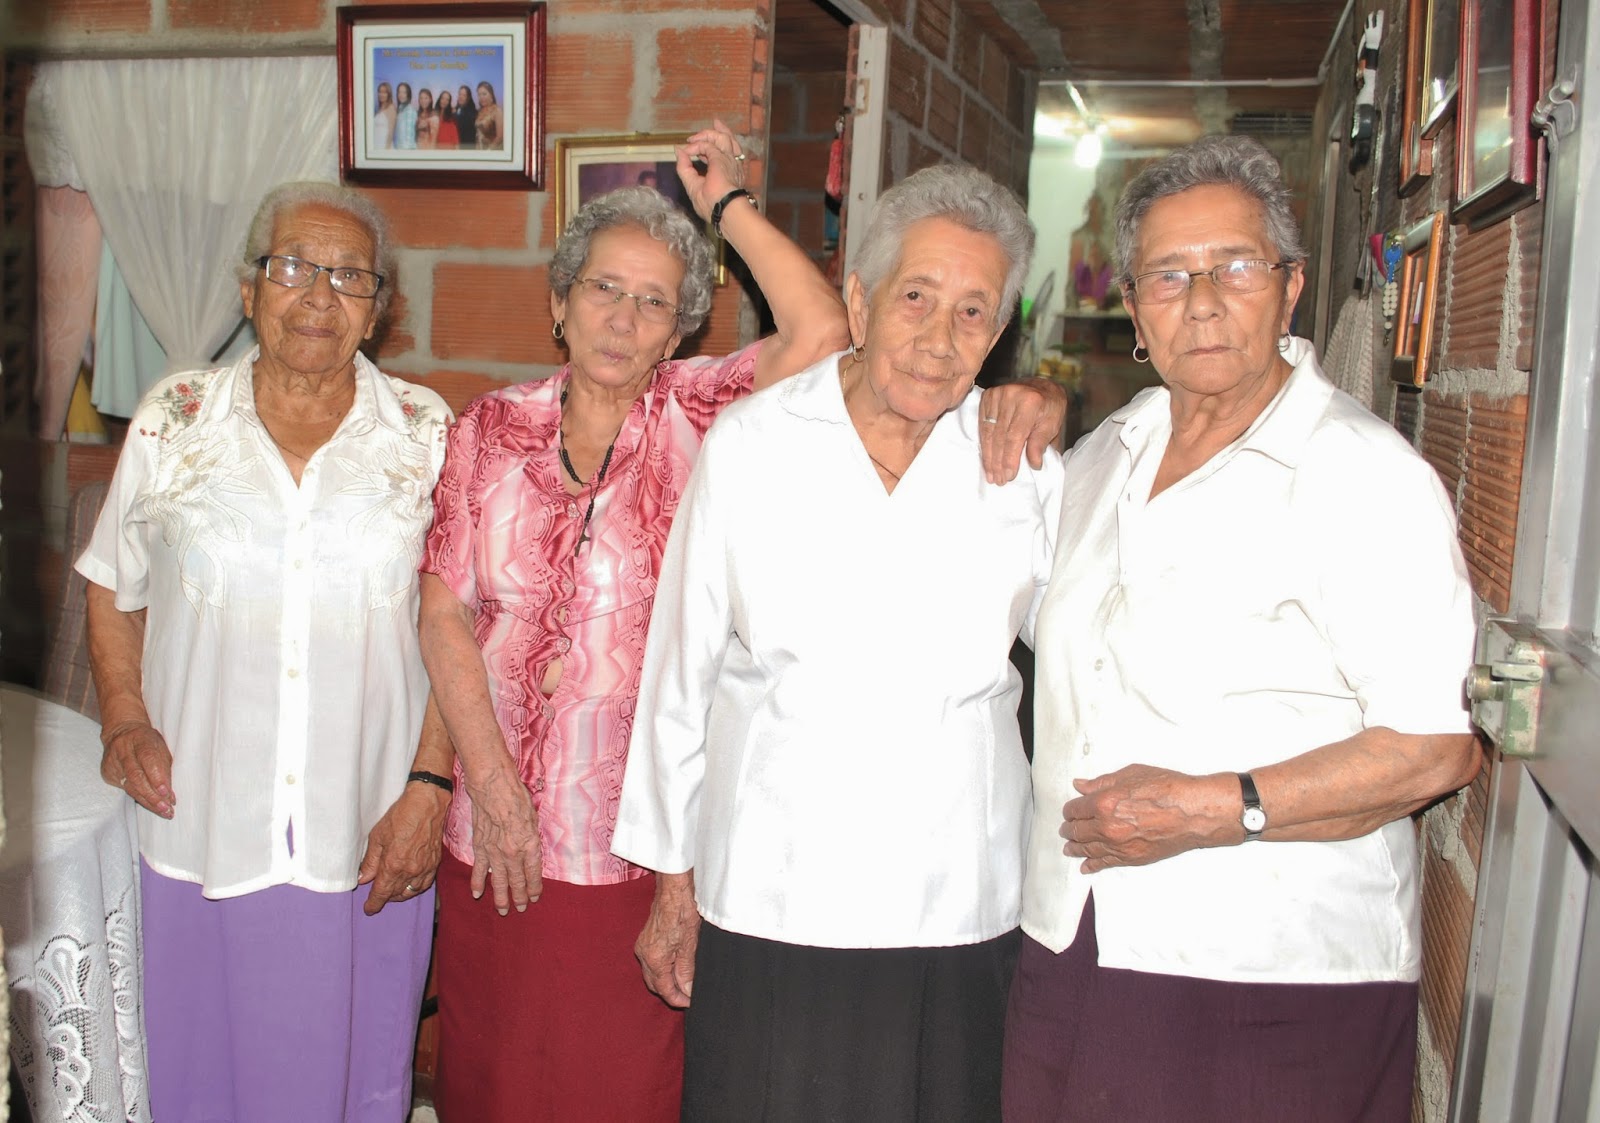 In April 2014, aged 103 (second from the right), with her daughters. (Source: Comunidad al Día)